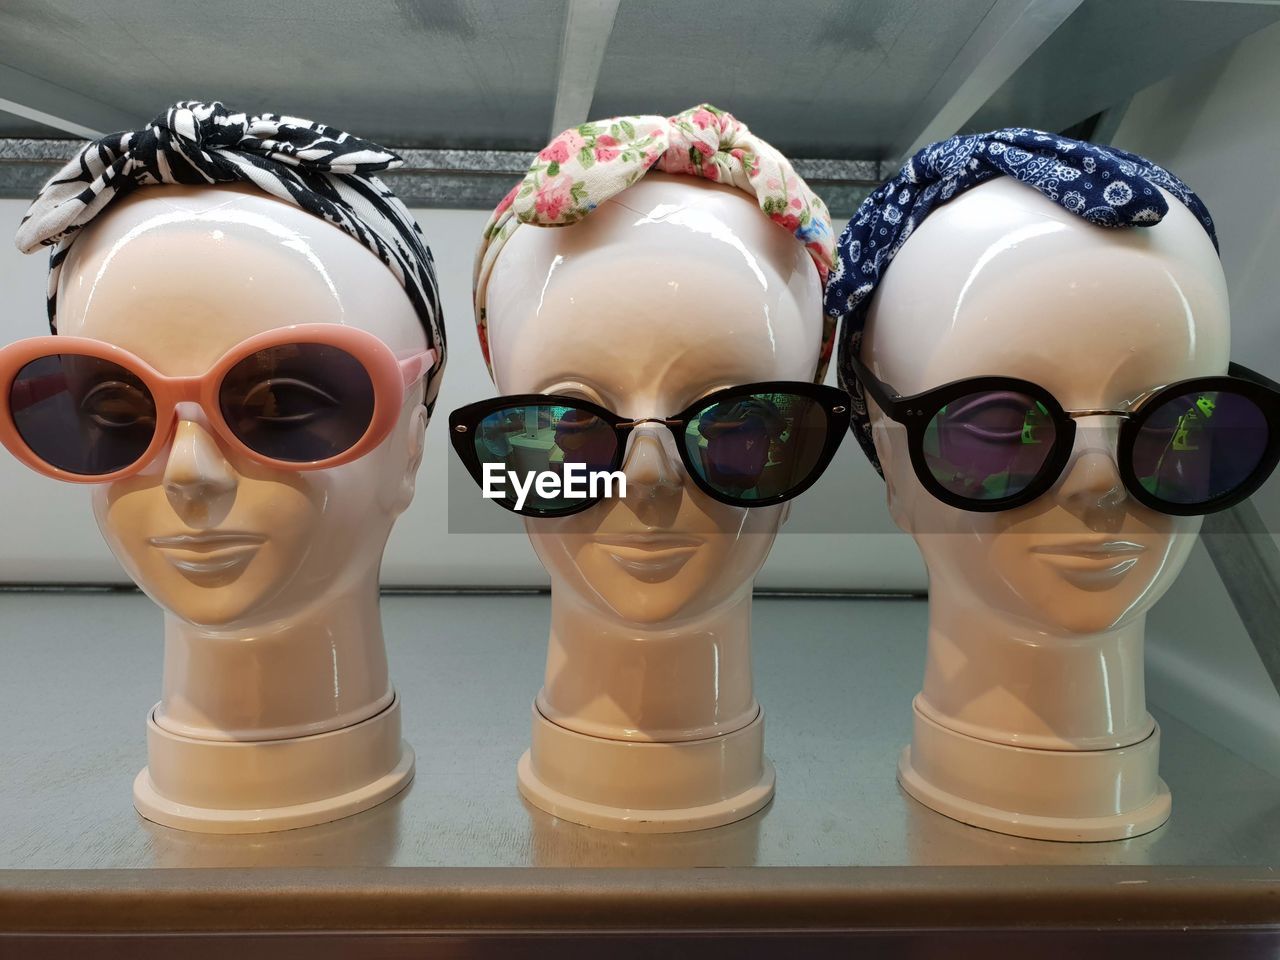 Close-up of headscarf and sunglasses on mannequins